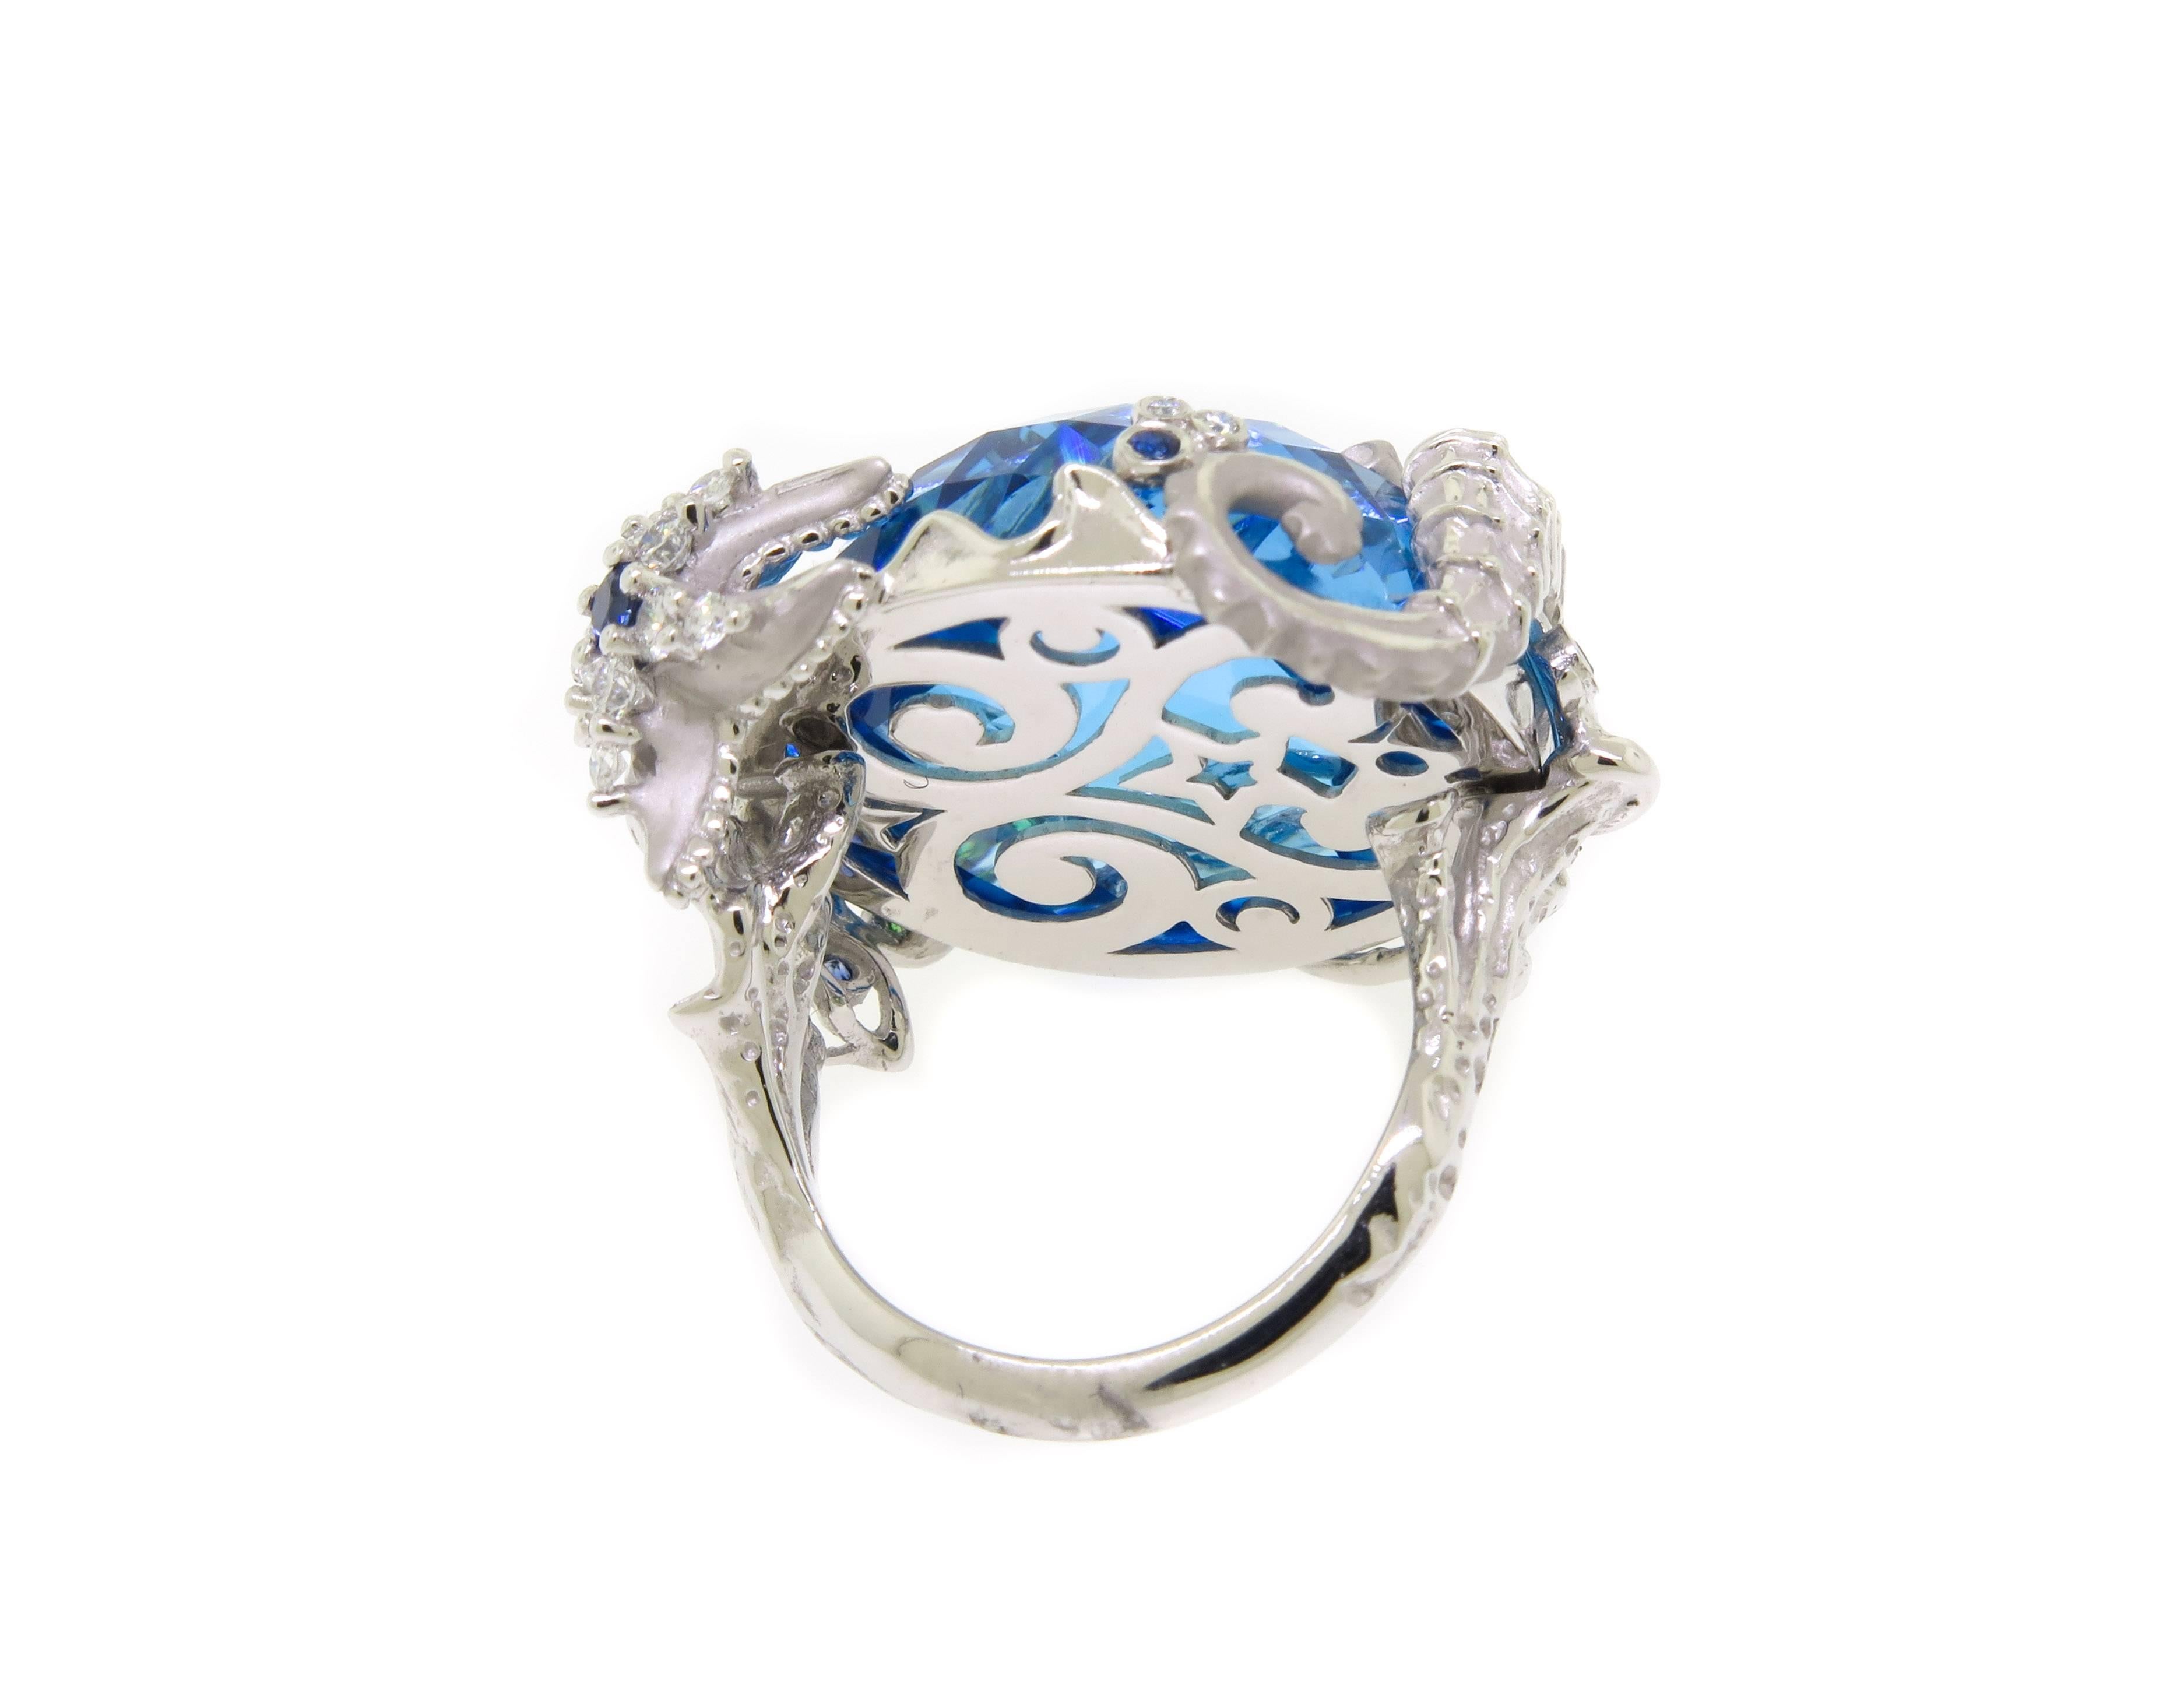 Women's Marine Life Cocktail Ring by Carrera y Carrera